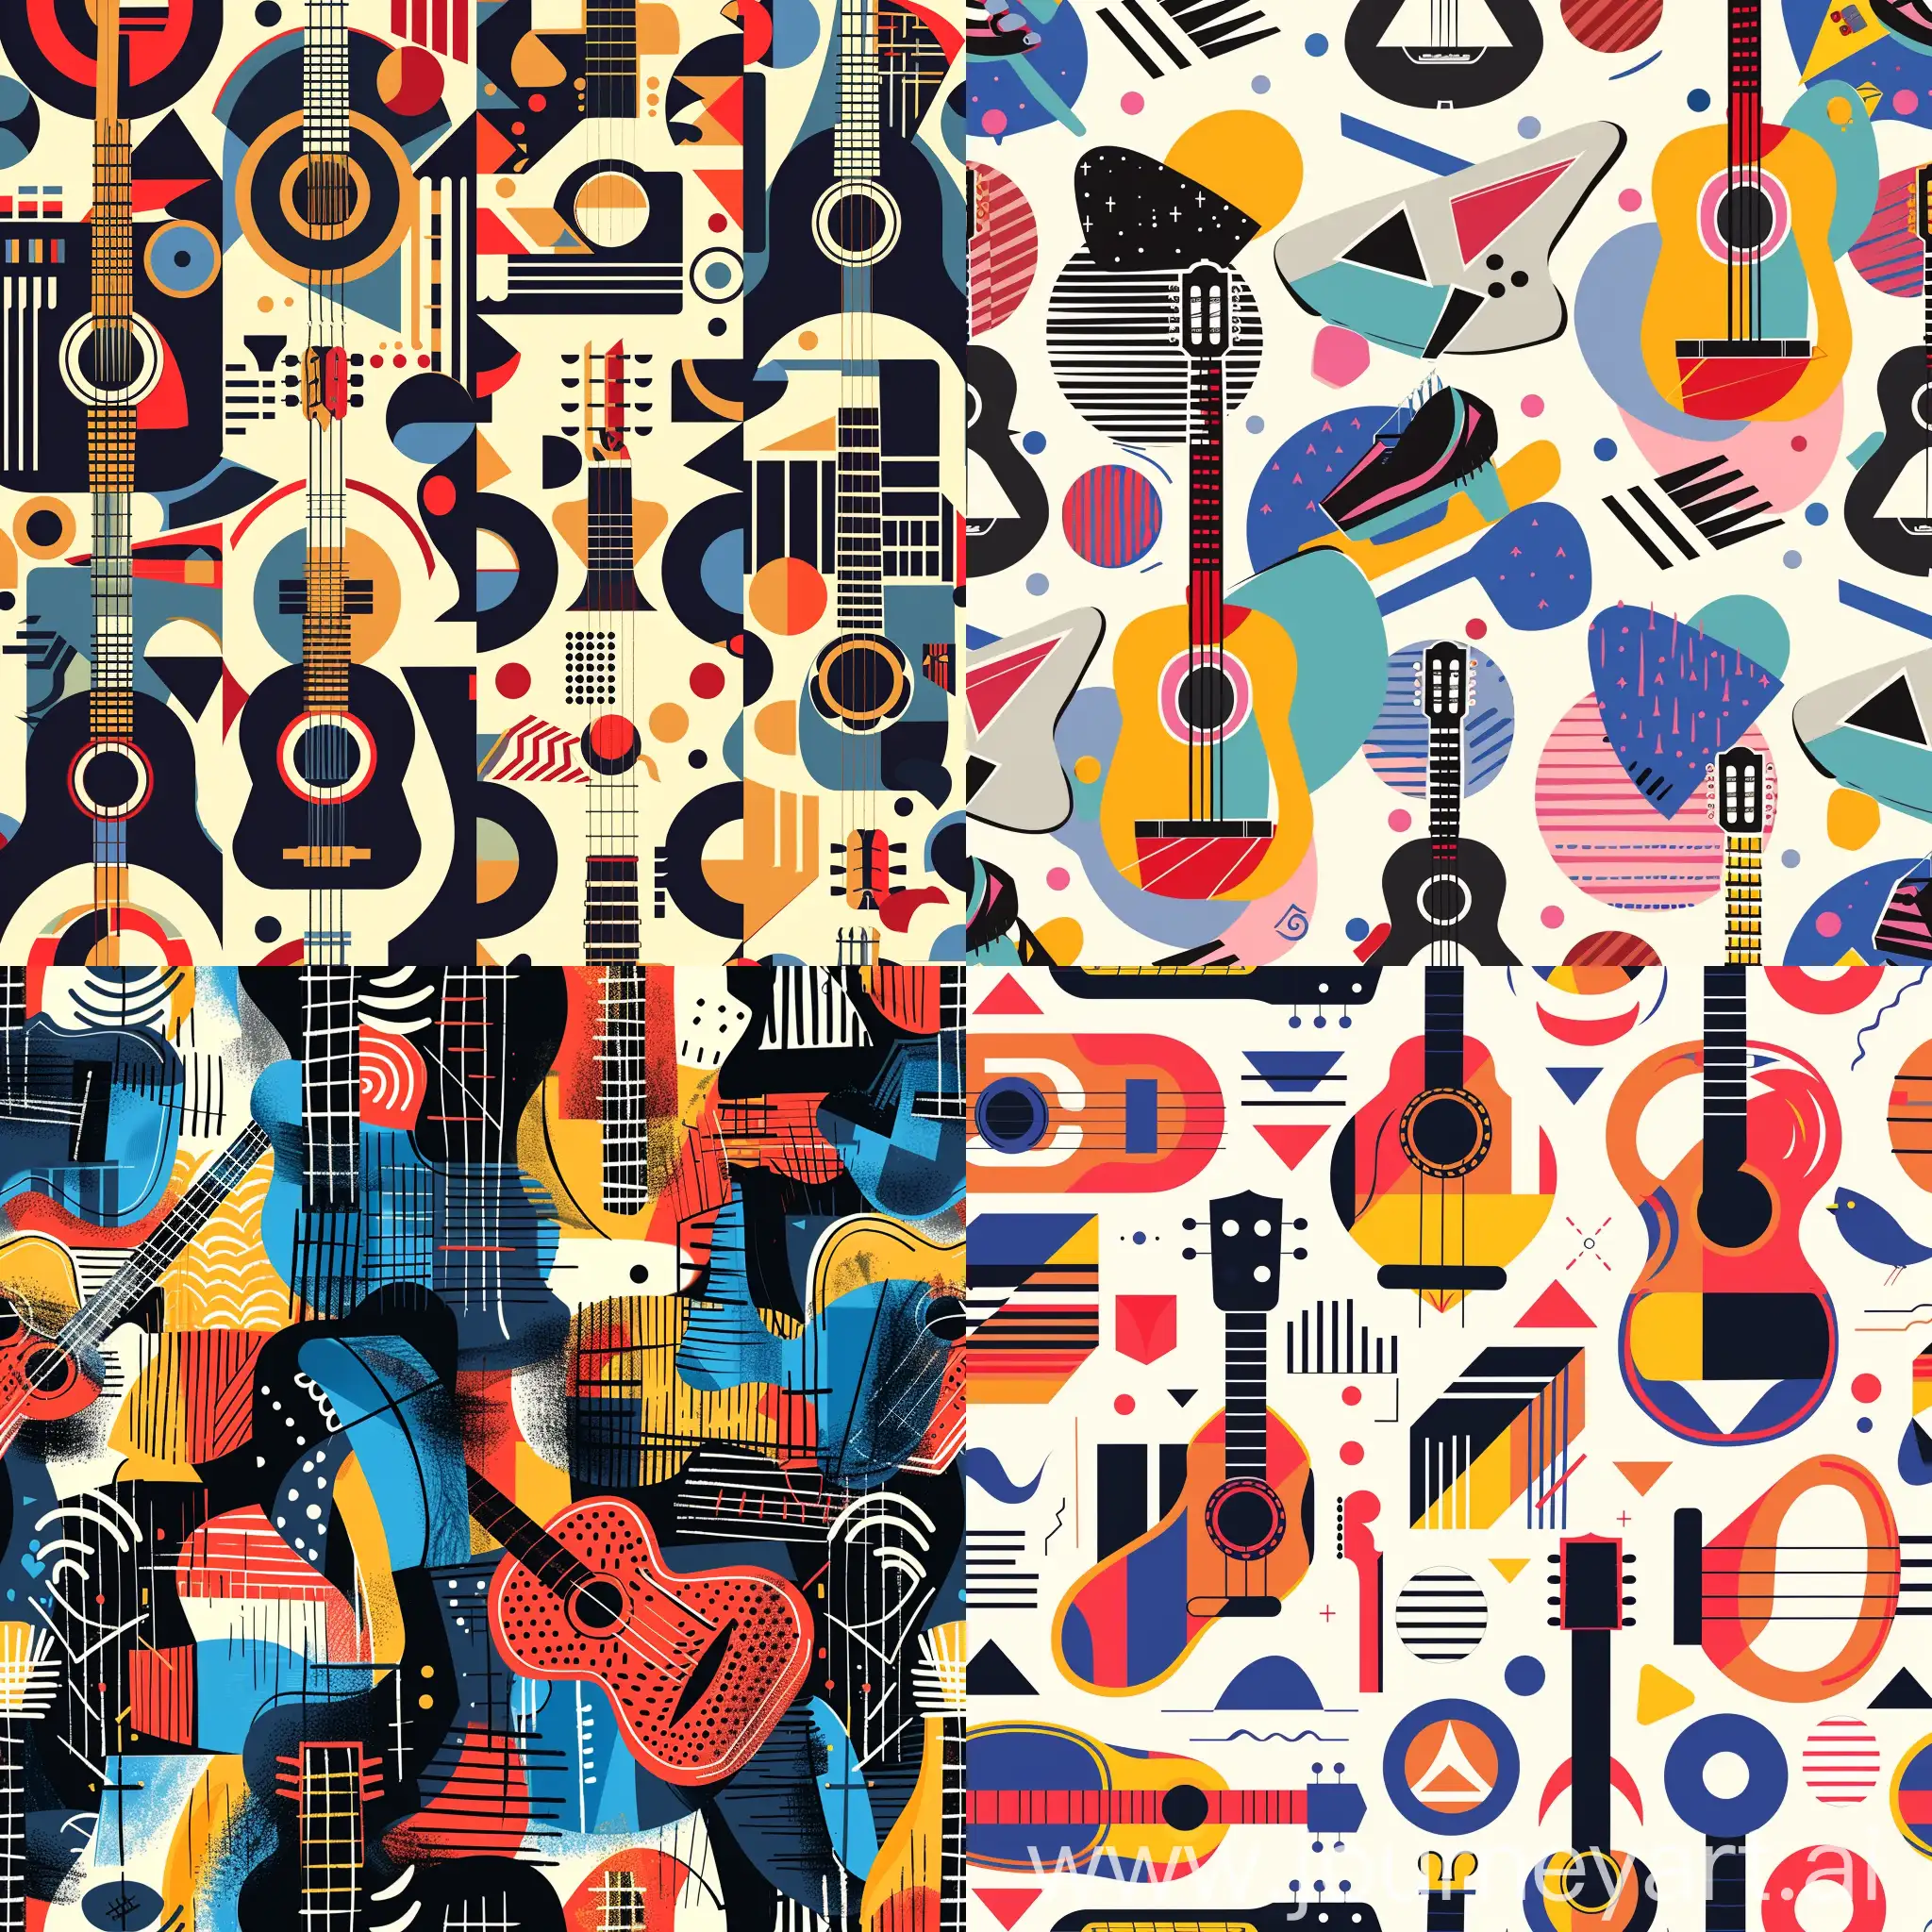 Identical pattern with abstract geometric shapes associated with the guitar